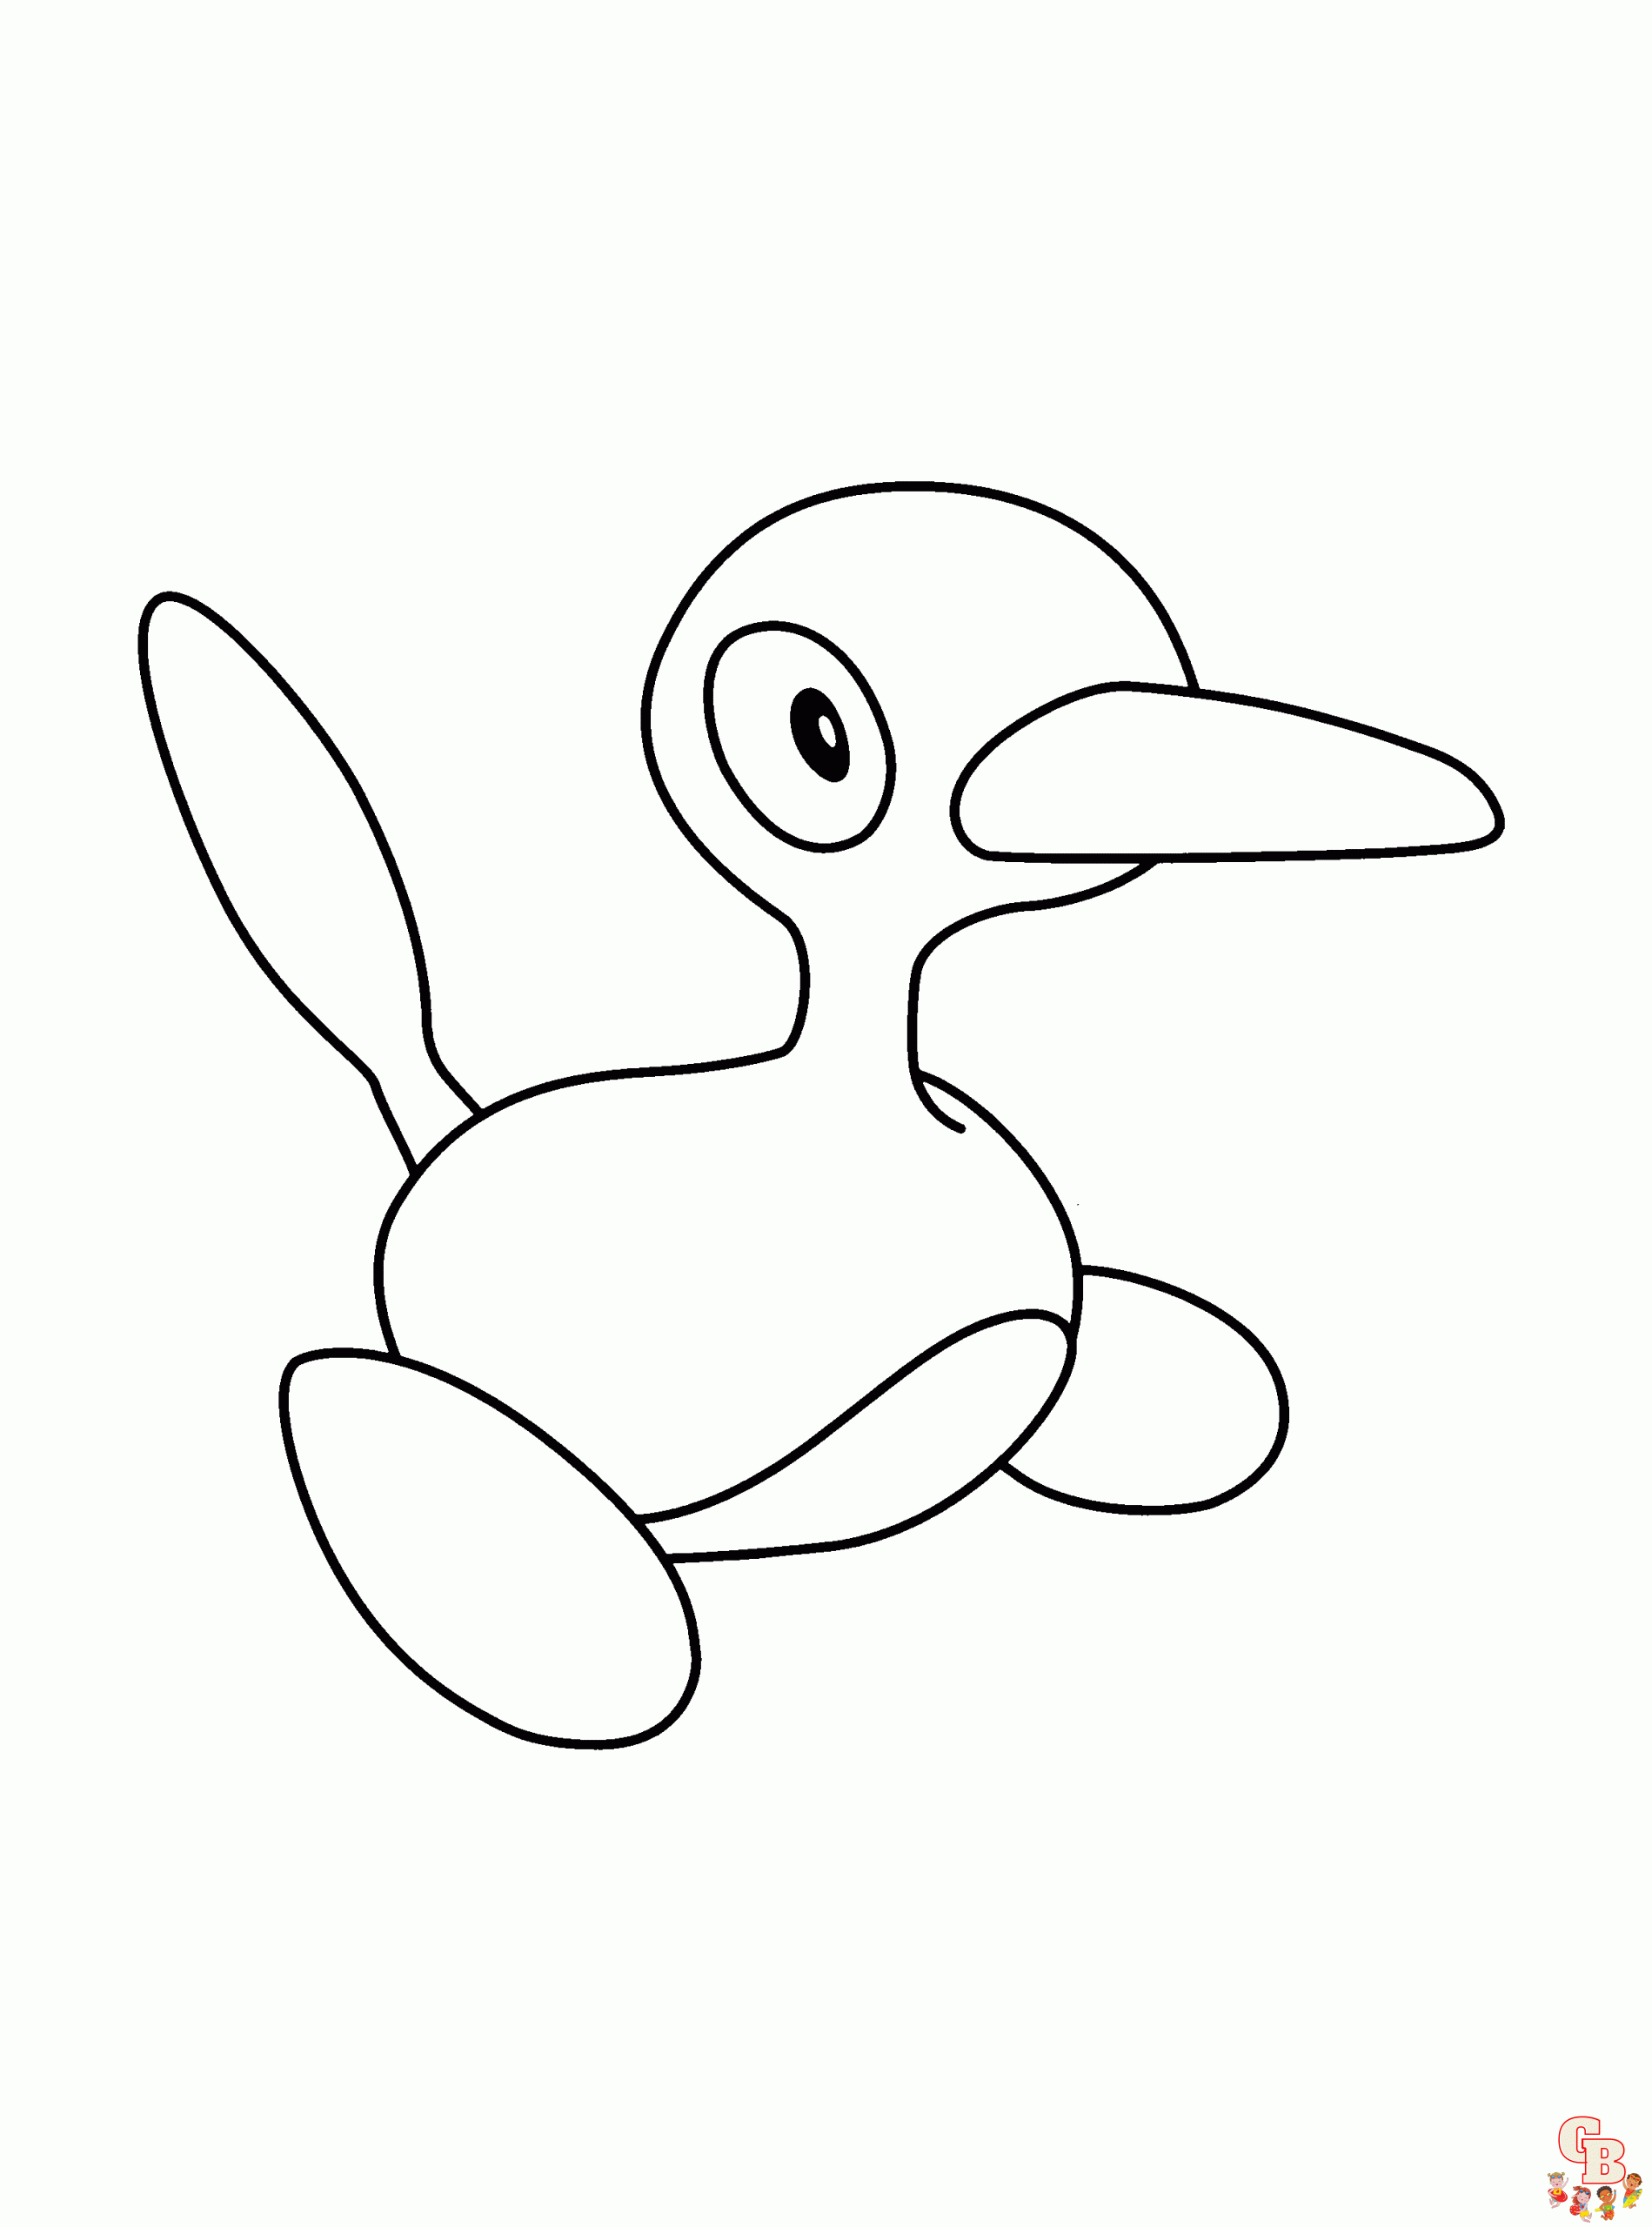 Porygon2 Coloring Pages 1